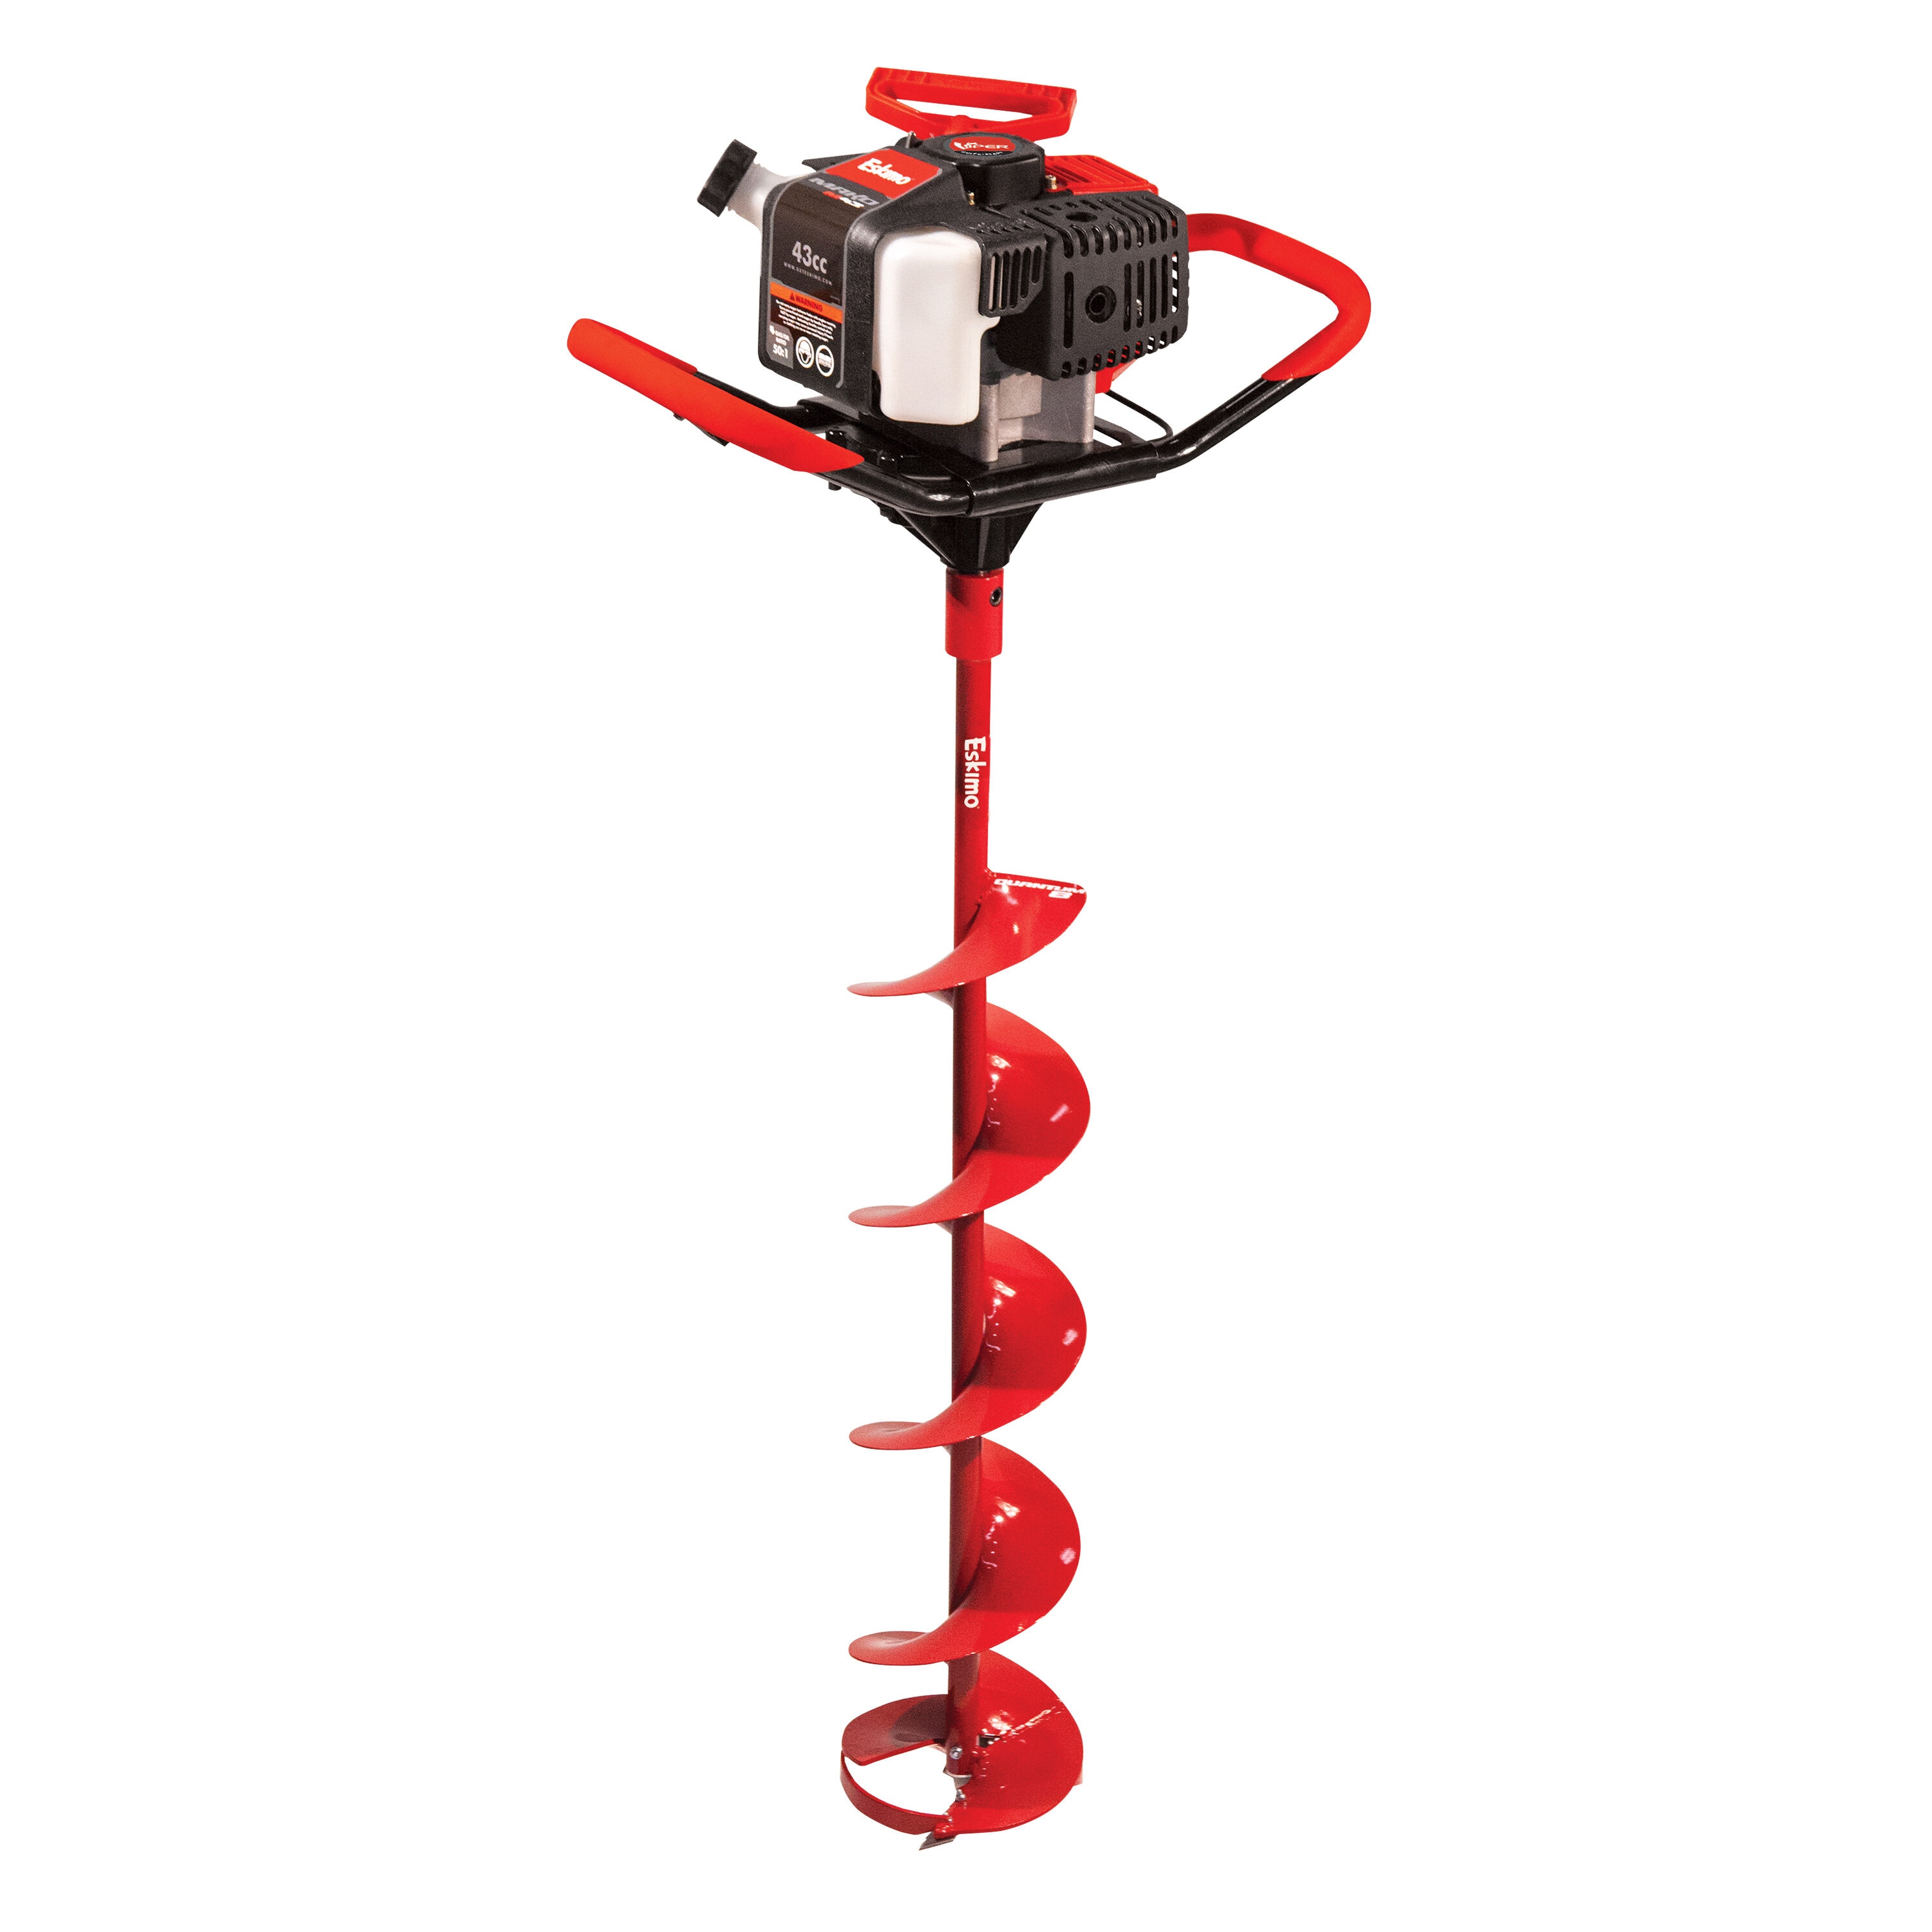 43cc Gas Powered Ice Fishing Auger, 8-inch Auger Bits at